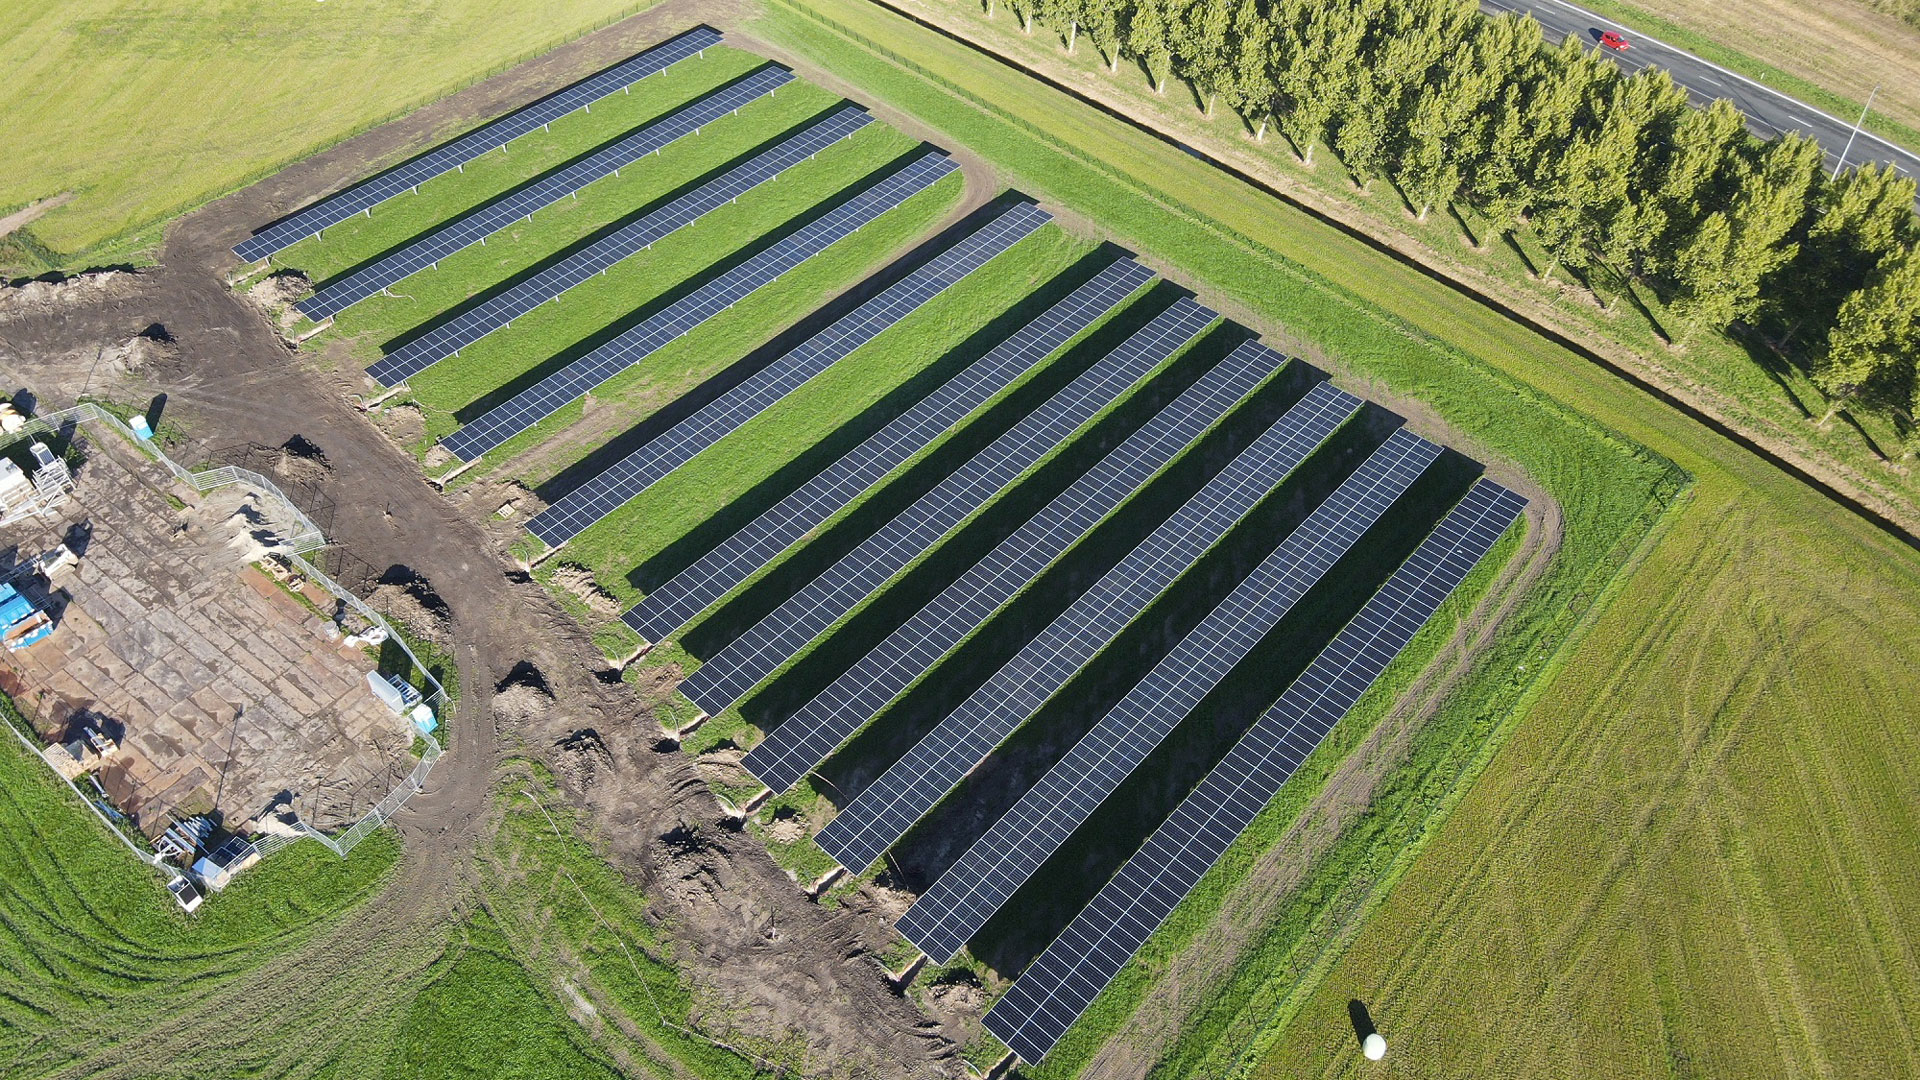 Agri PV project "Symbizon" near Almere in the Netherlands